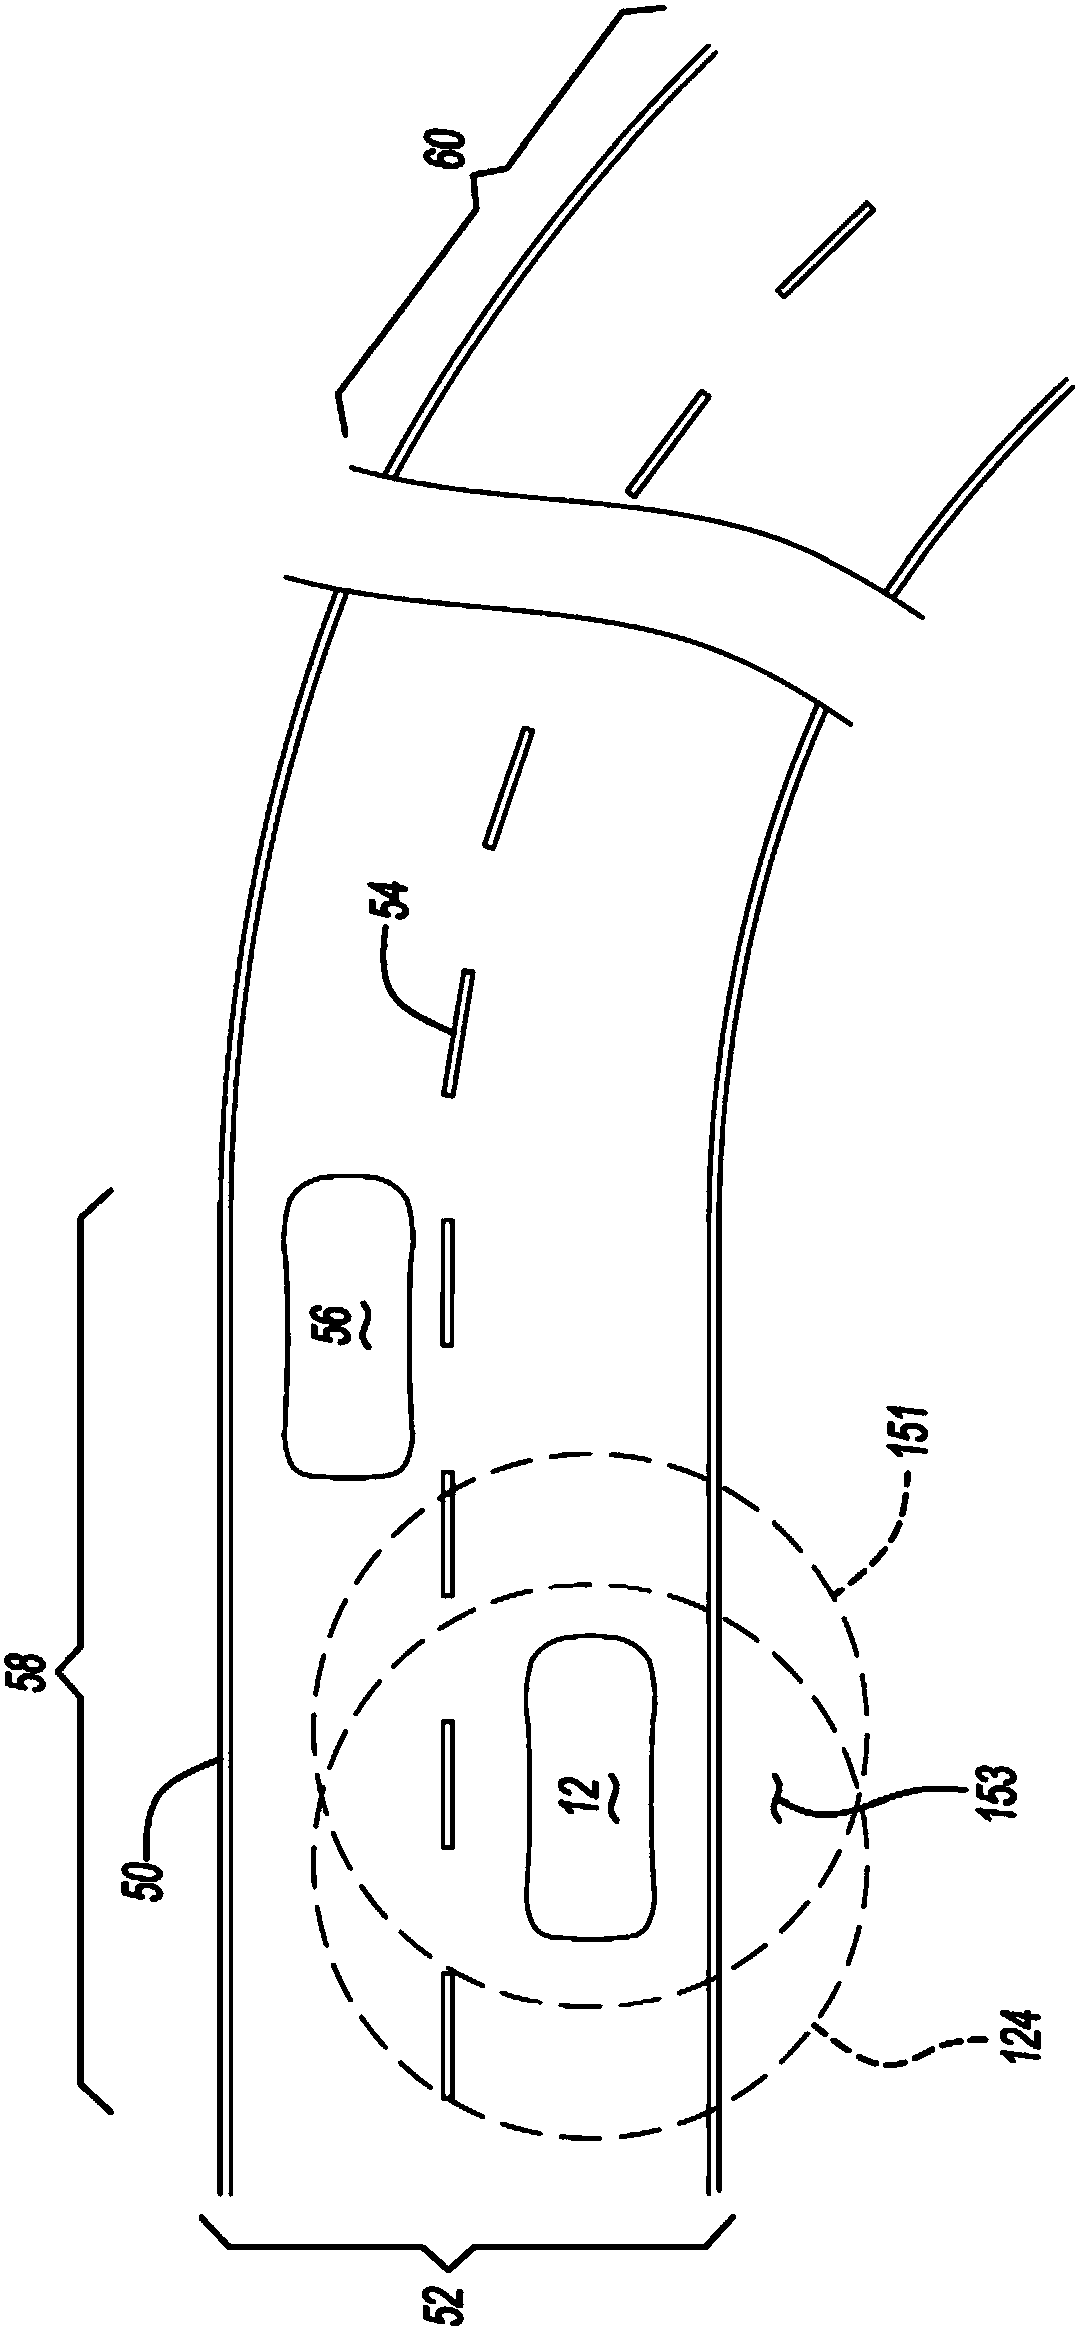 Method and system for performing advanced driver assistance system functions using beyond line-of-sight situational awareness